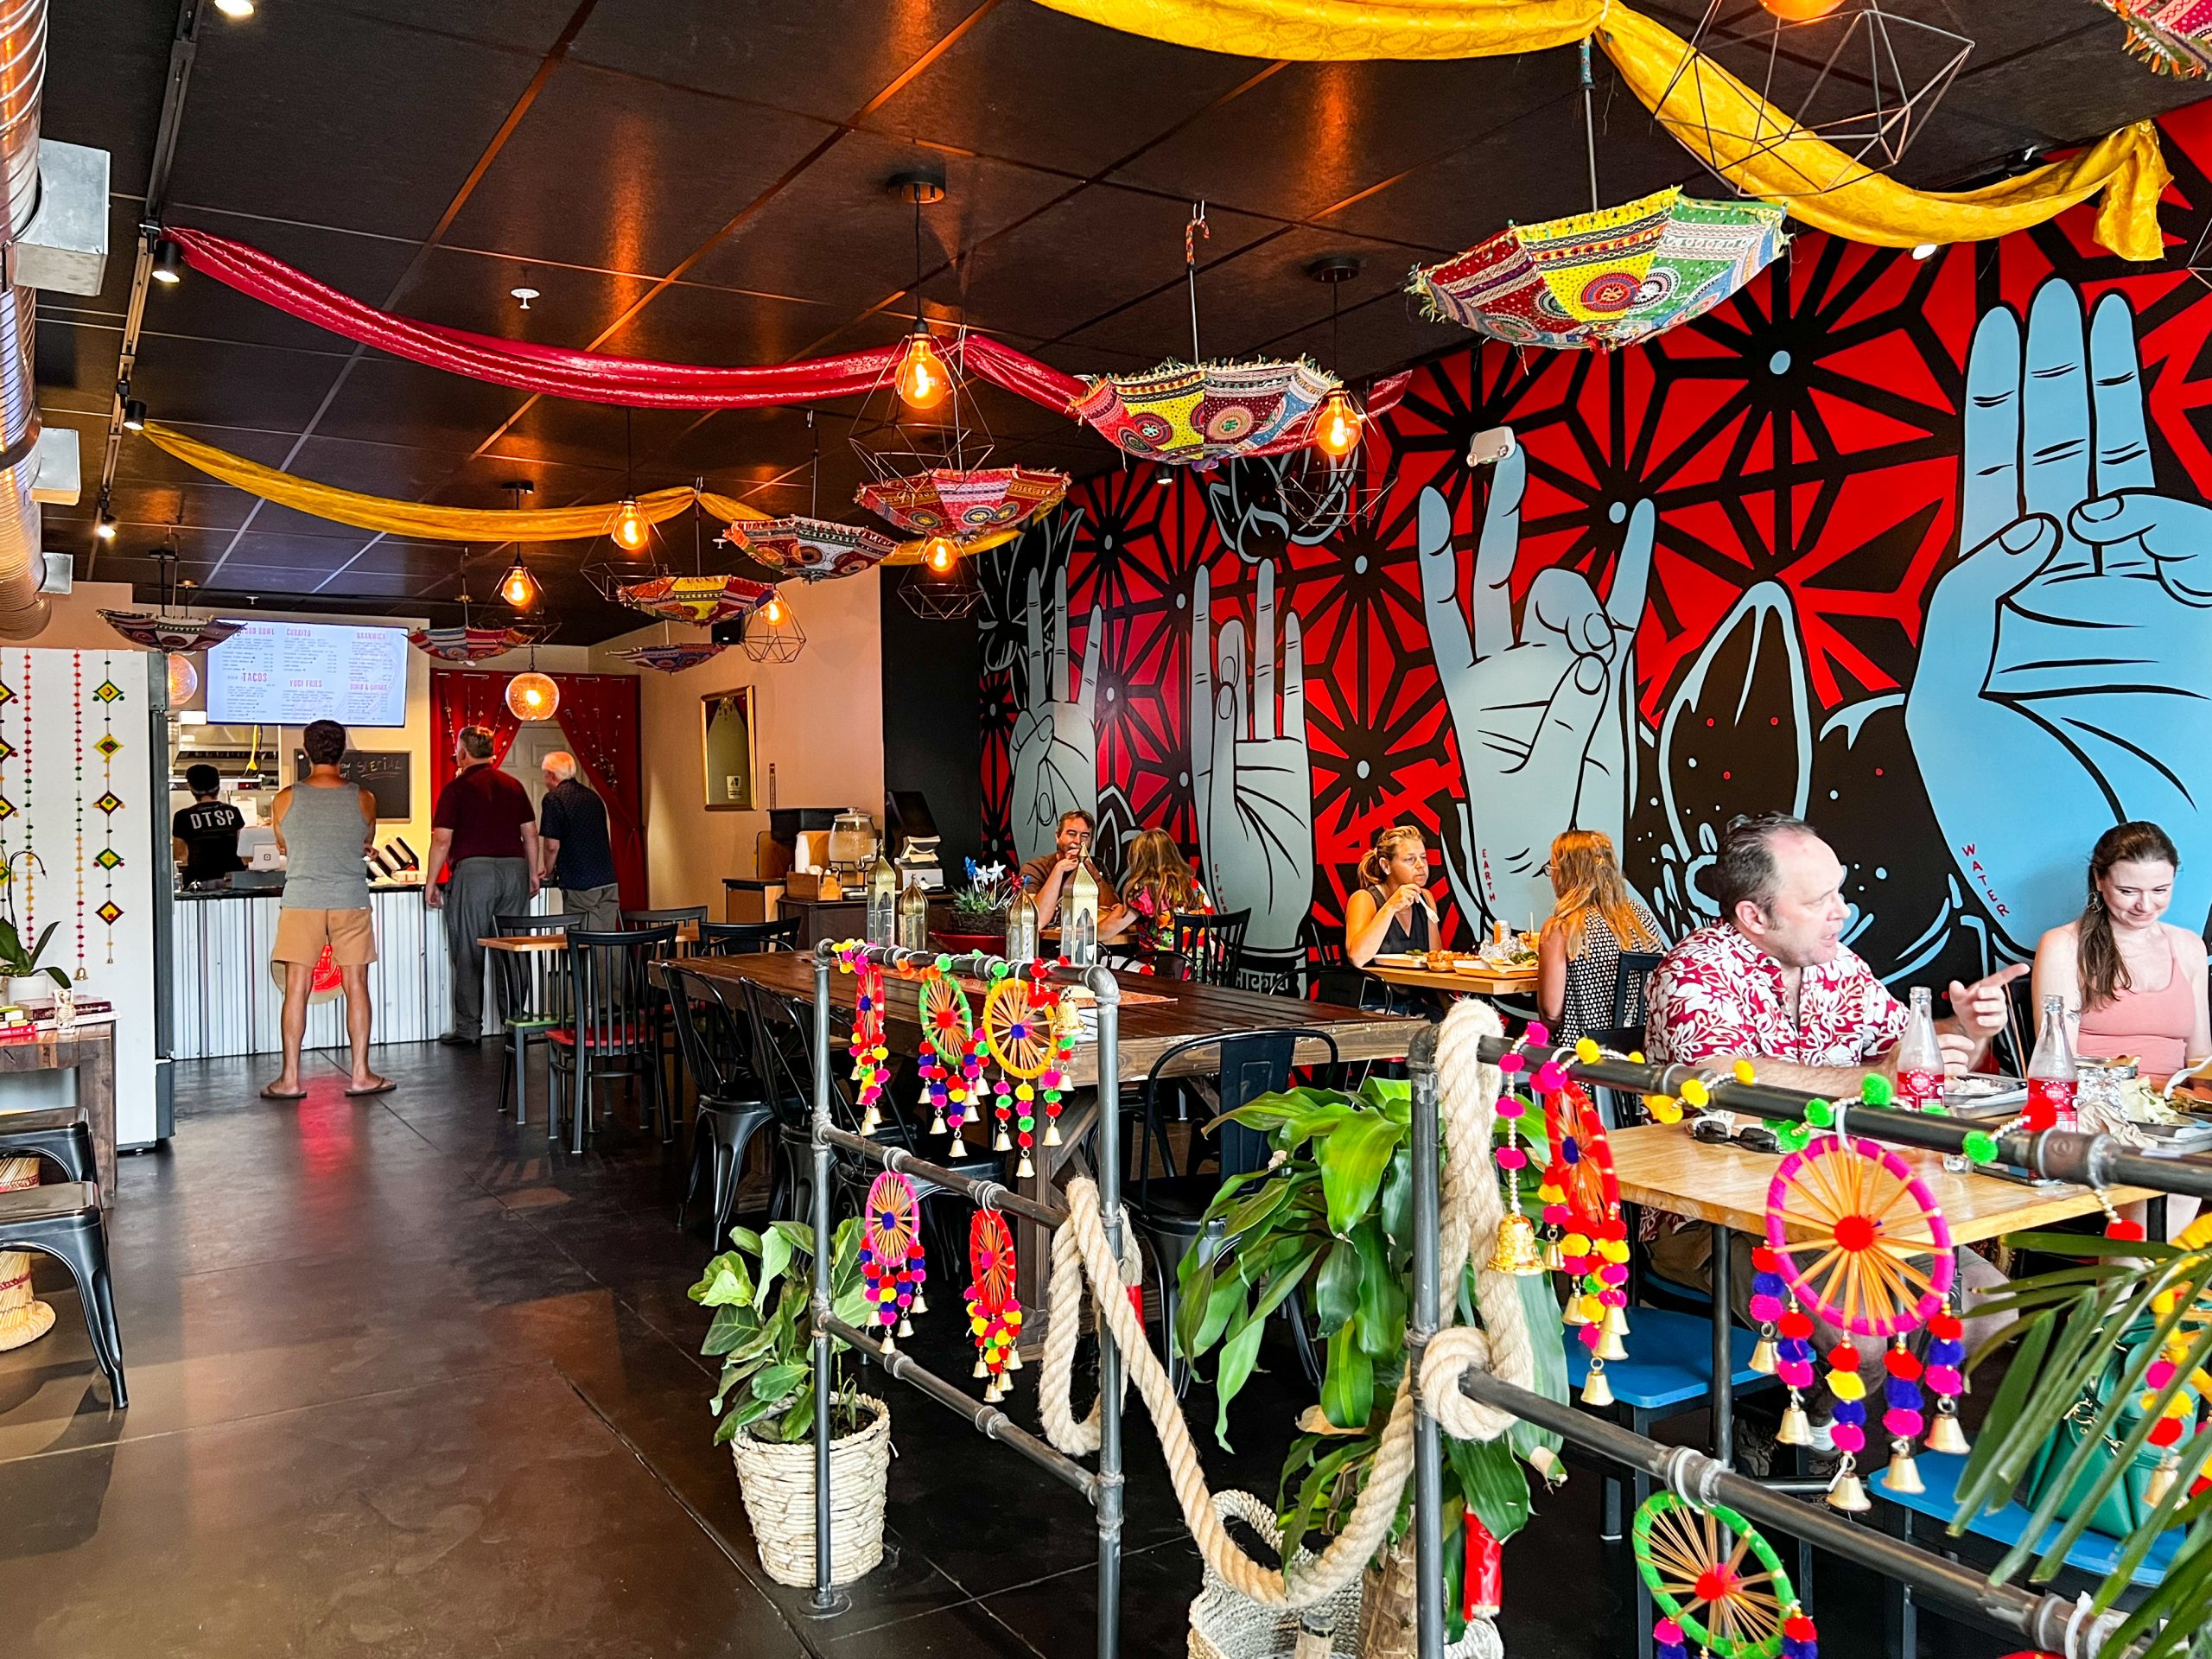 Inside The Twisted Indian's brick and mortar